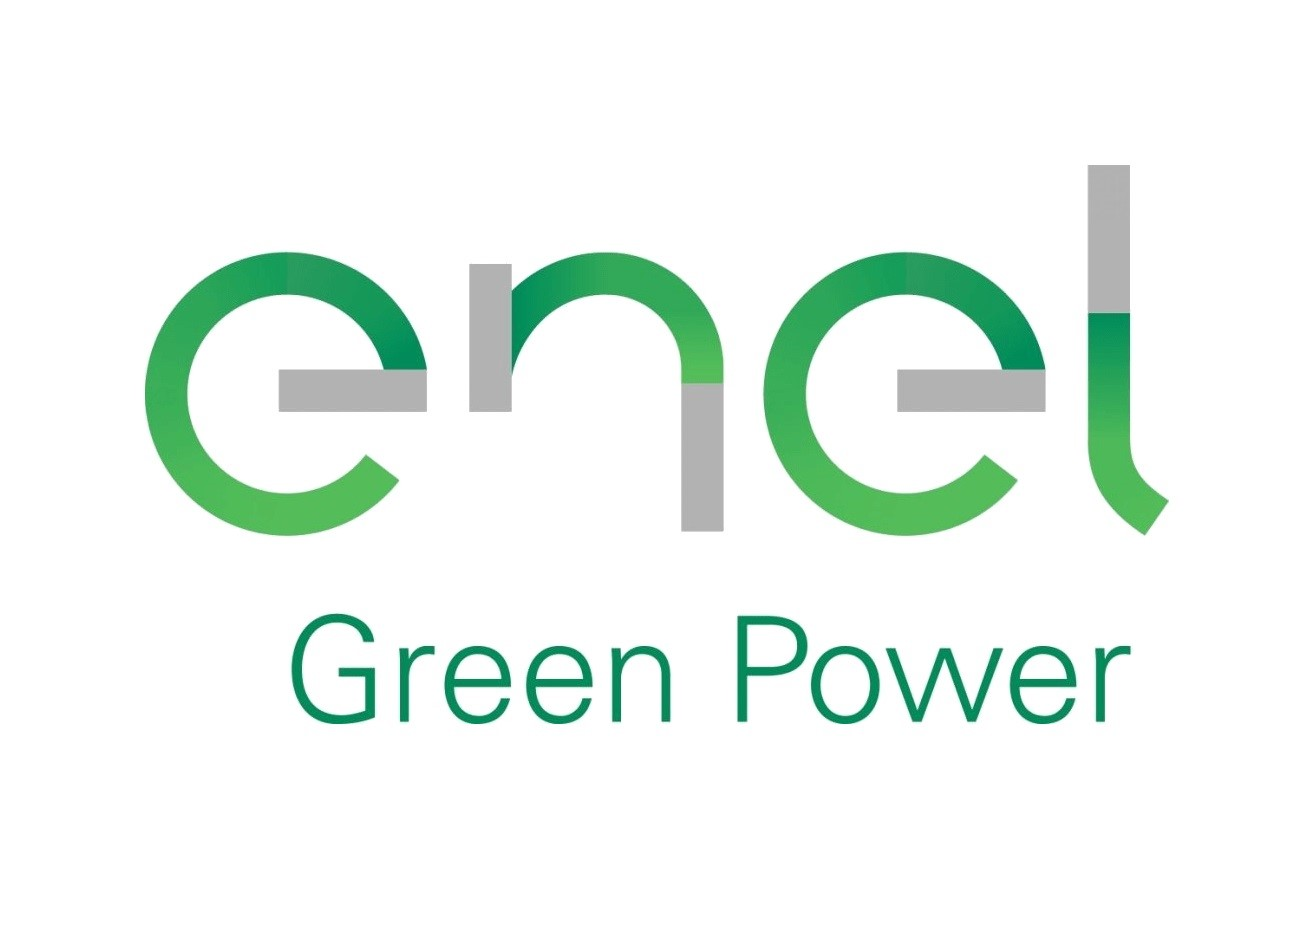 https://hydrogen-central.com/wp-content/uploads/2022/10/enel-green-power-hydrogen-project.png